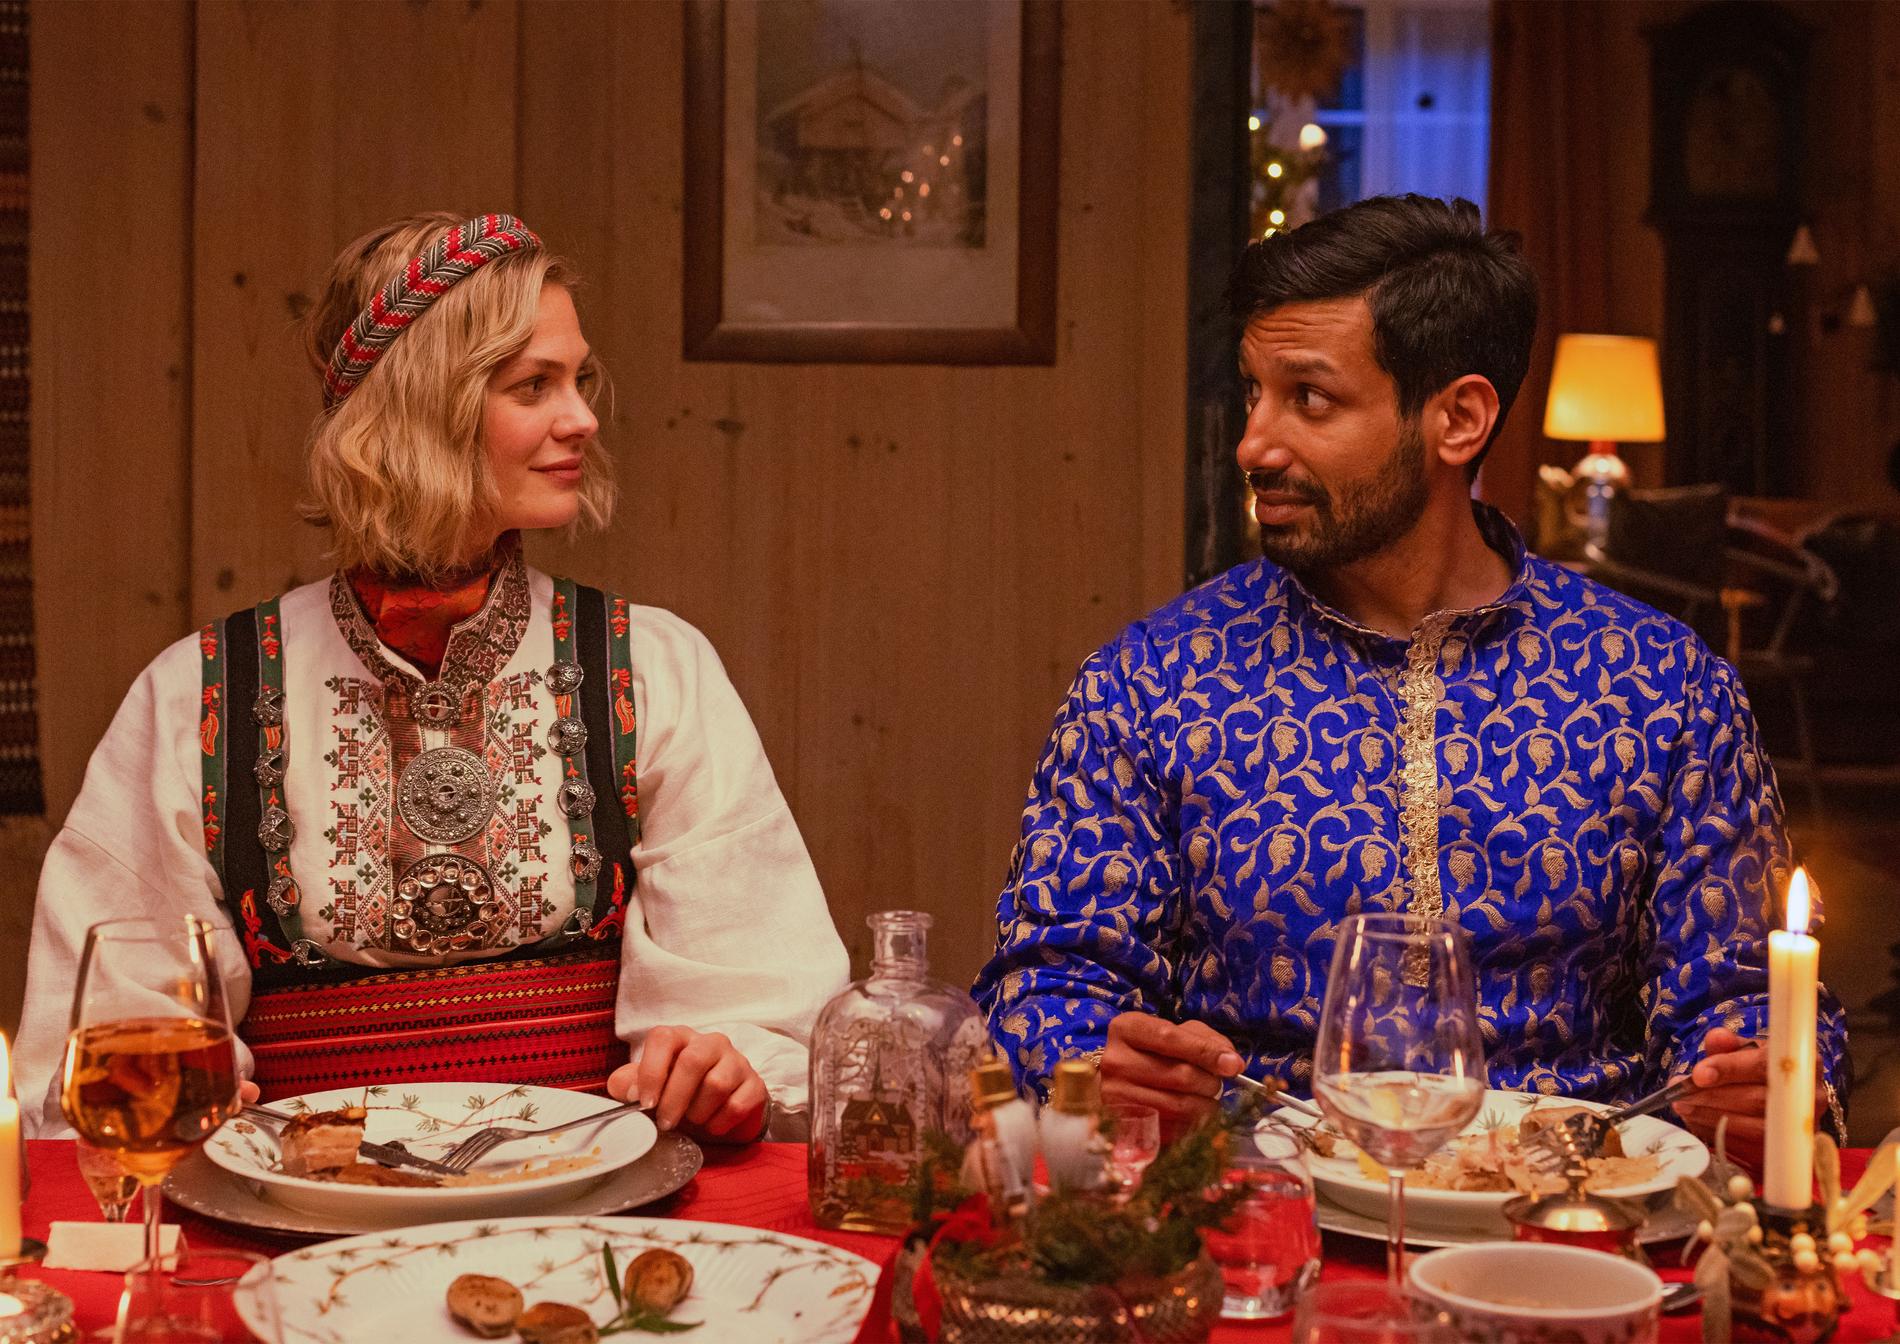 The Norwegian Netflix film “And Then It Was Christmas Again” is enticing viewers around the world